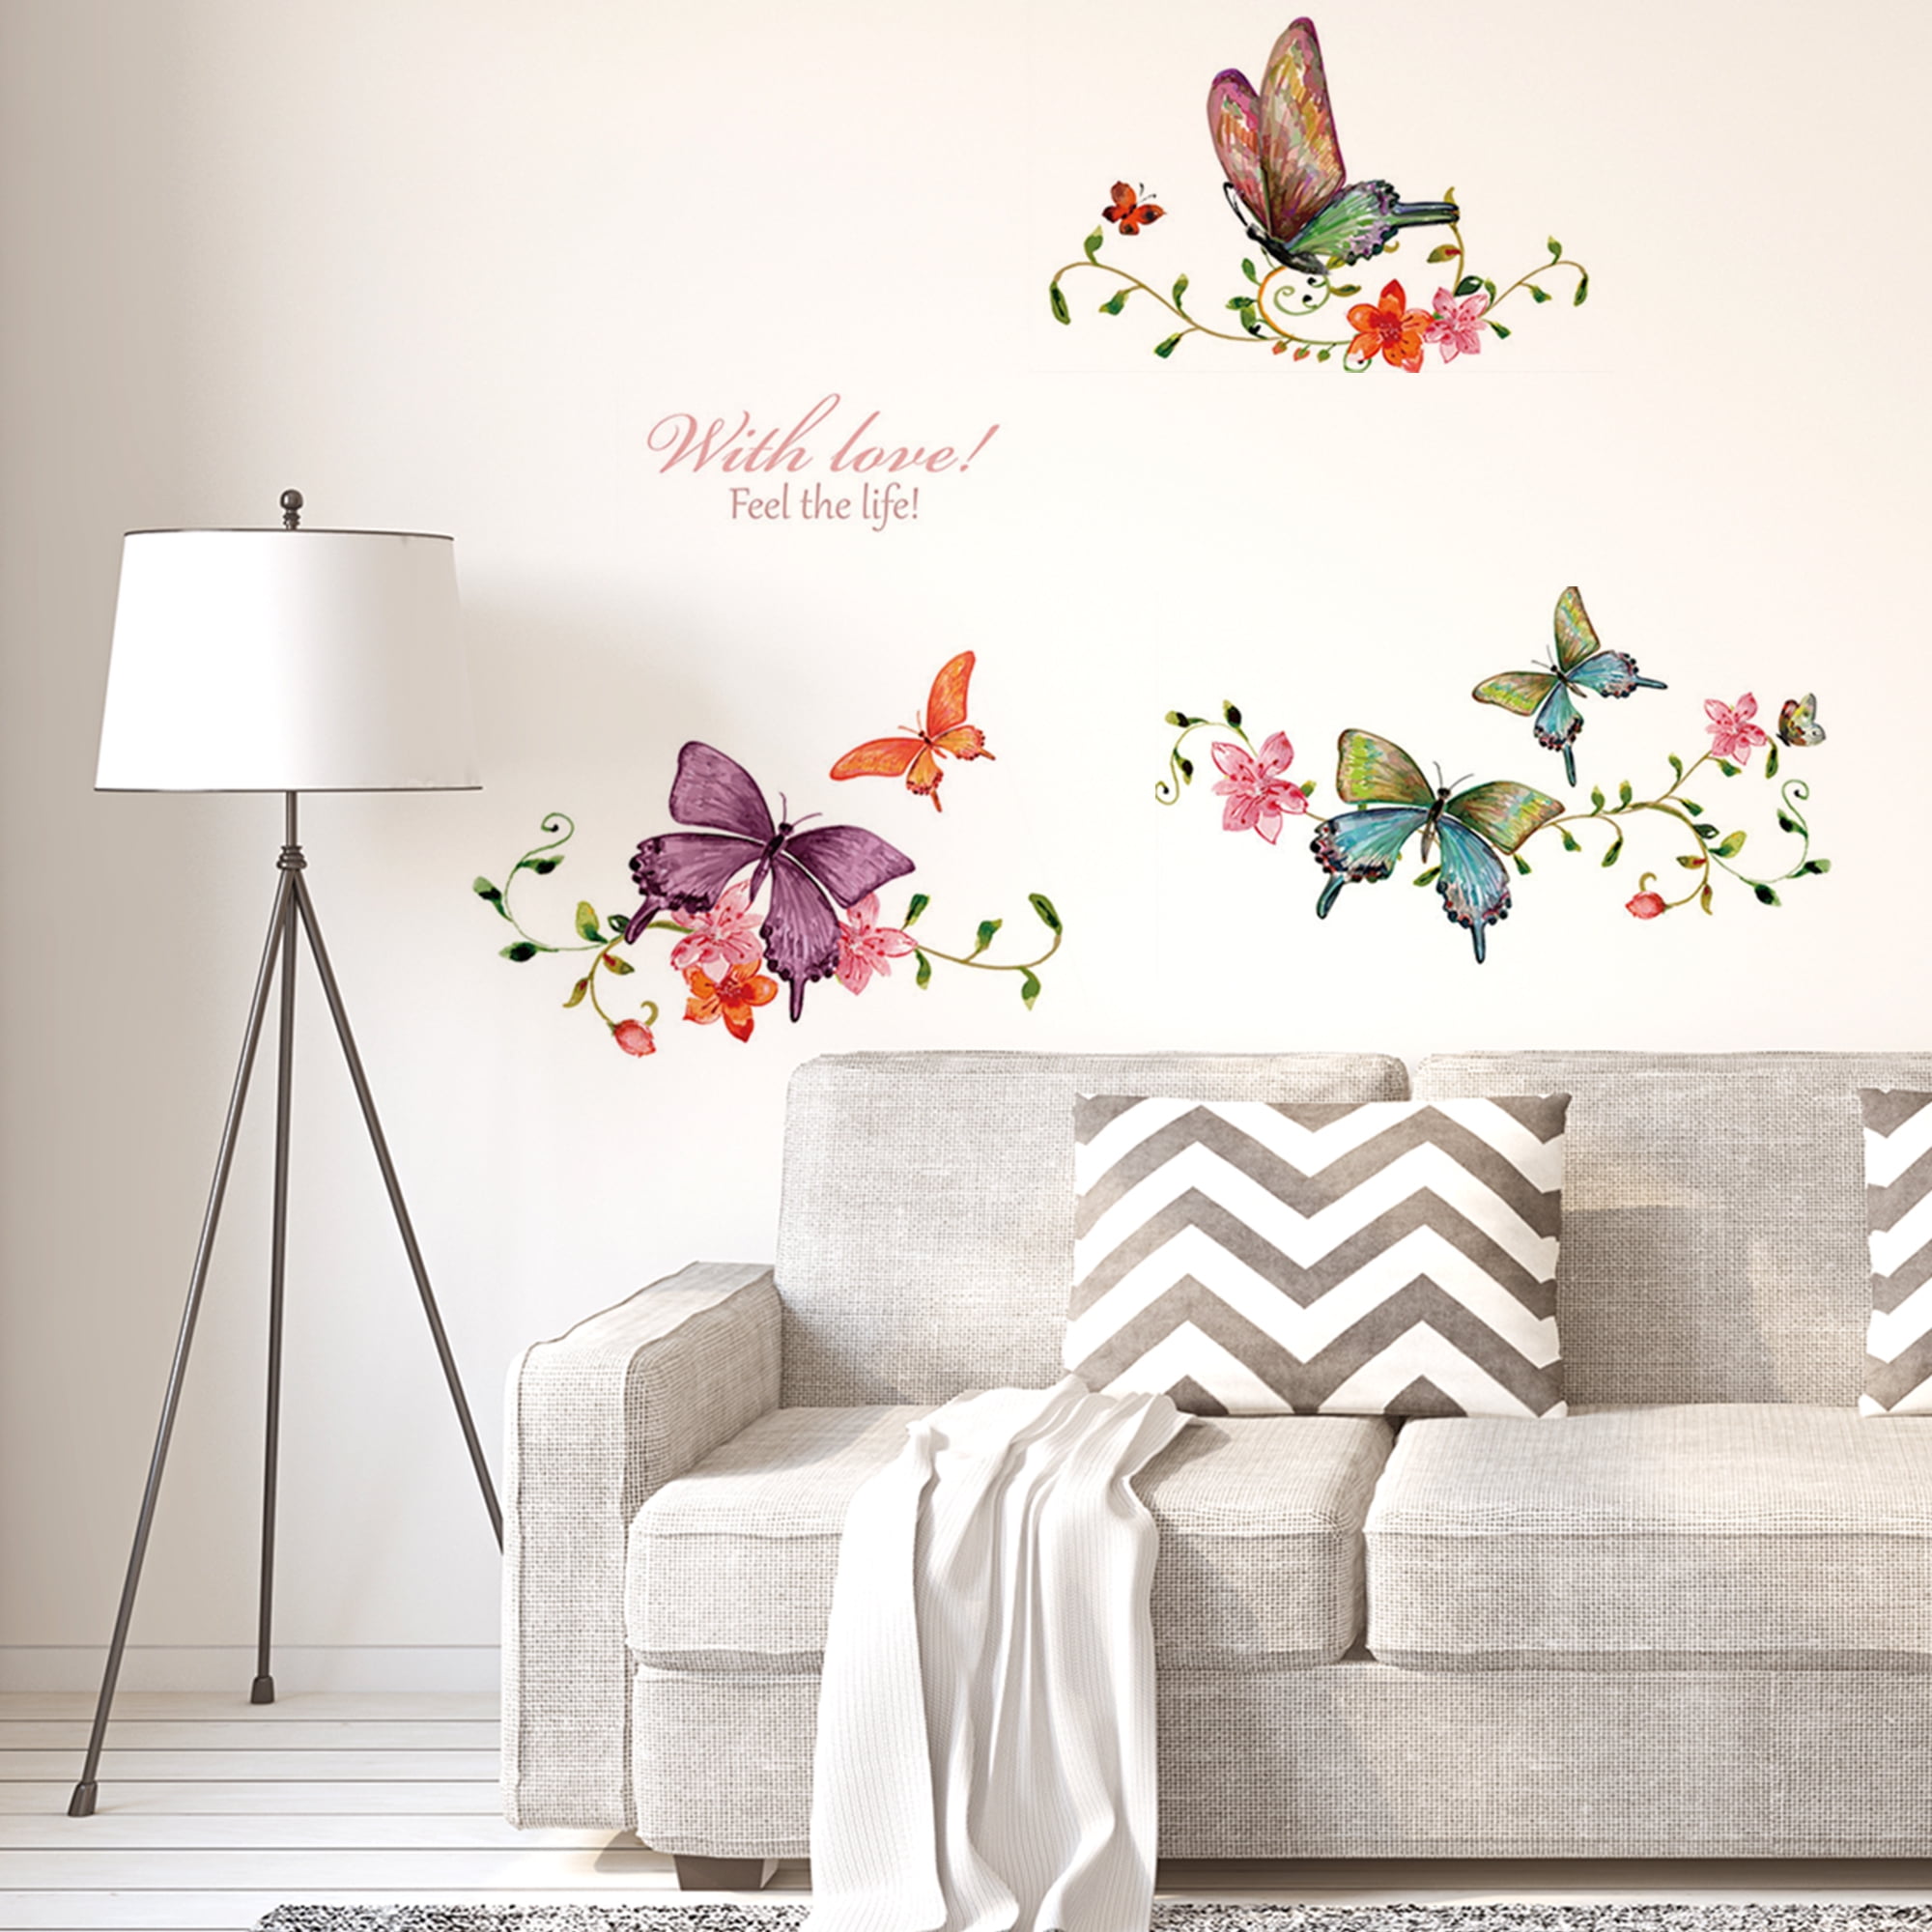 Details about   3D Peacock Pattern Wall Door Sticker Self-adhesive Decal Mural Room Home Decor.